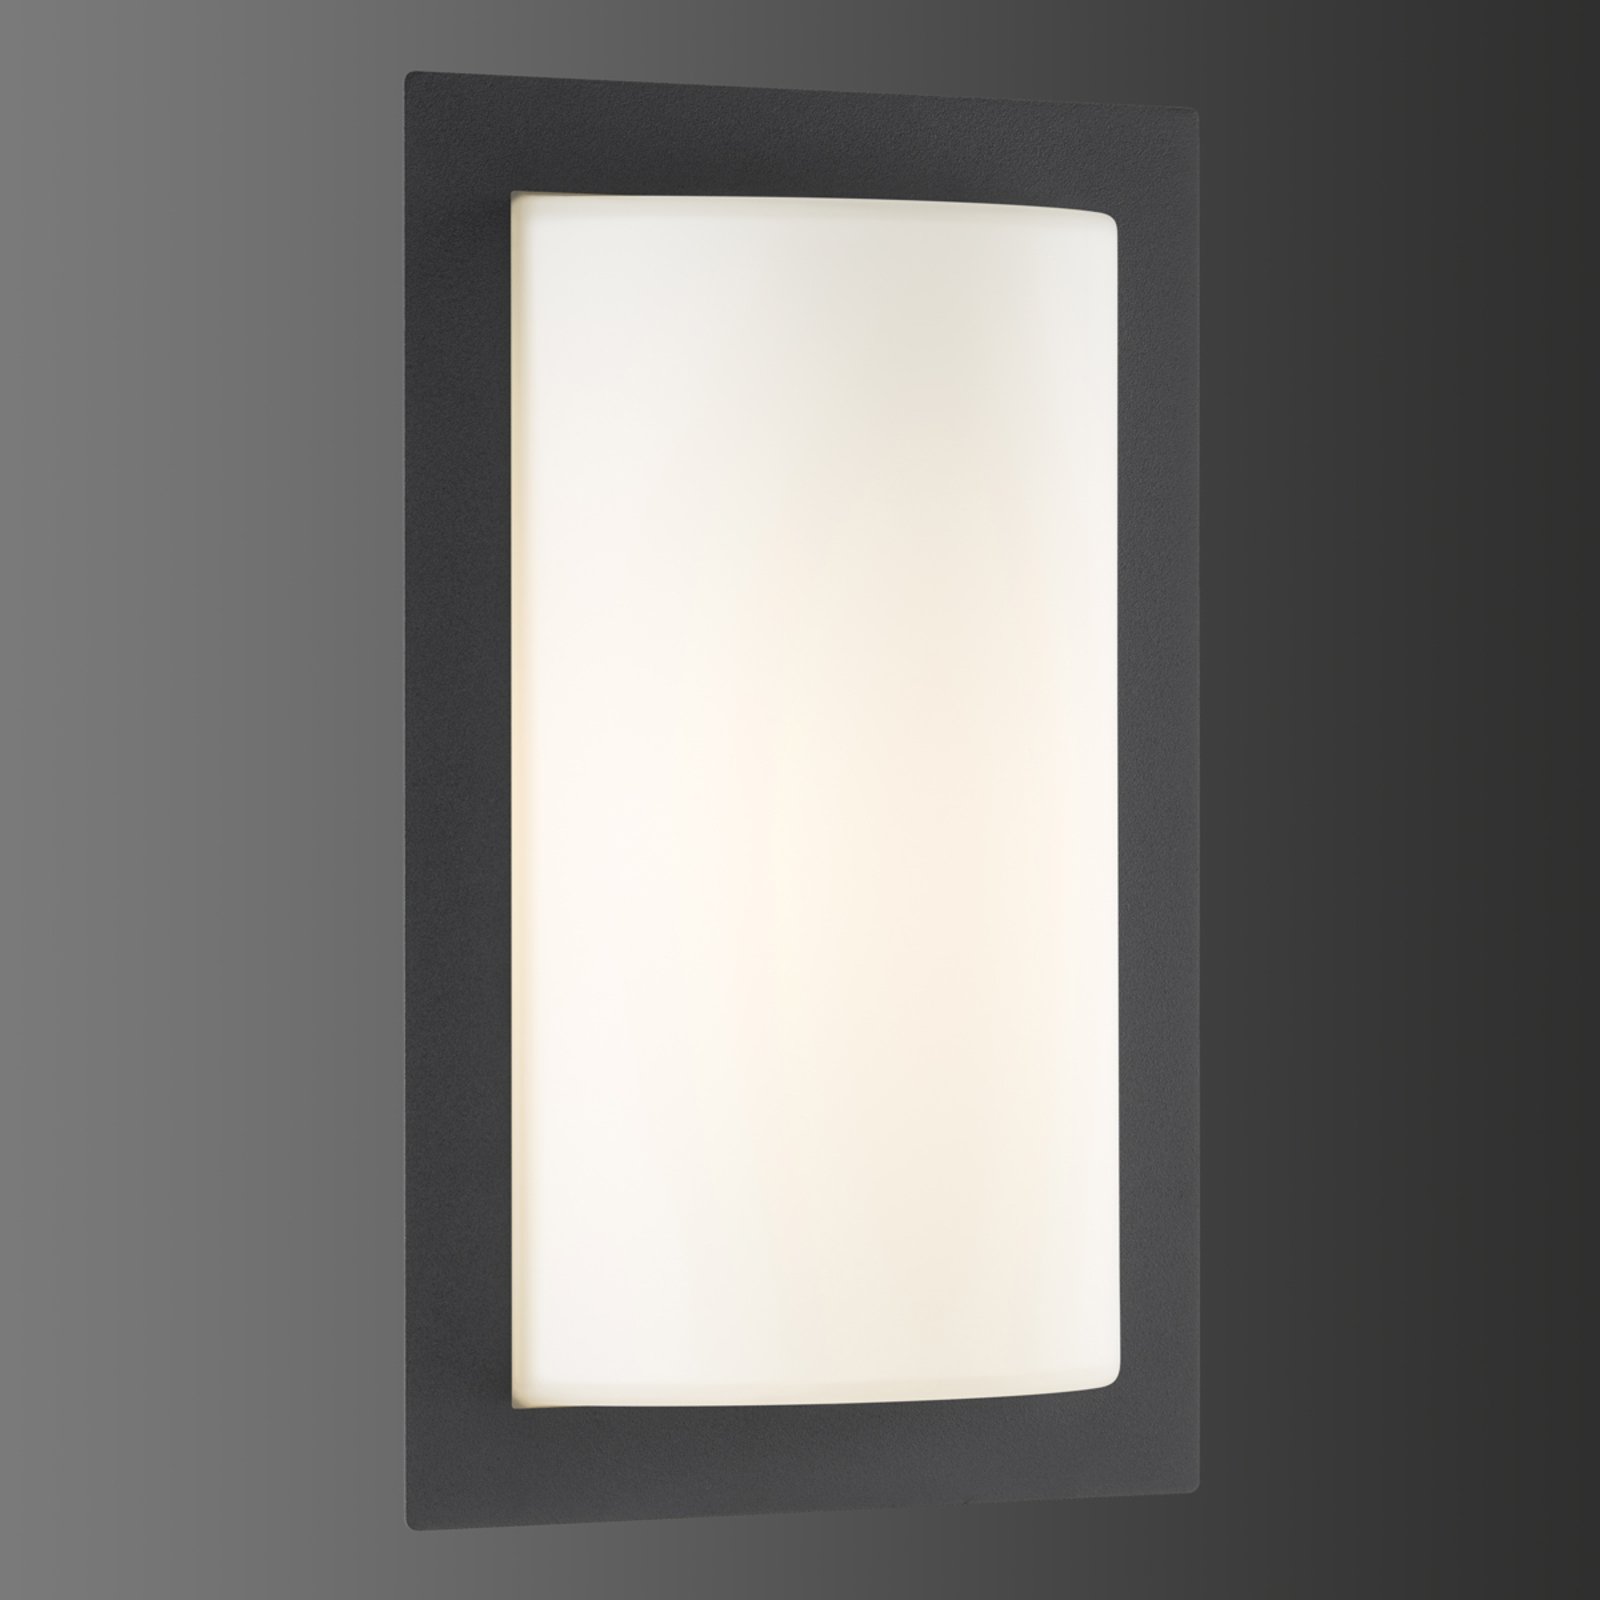 Luis LED outdoor wall light with motion detector